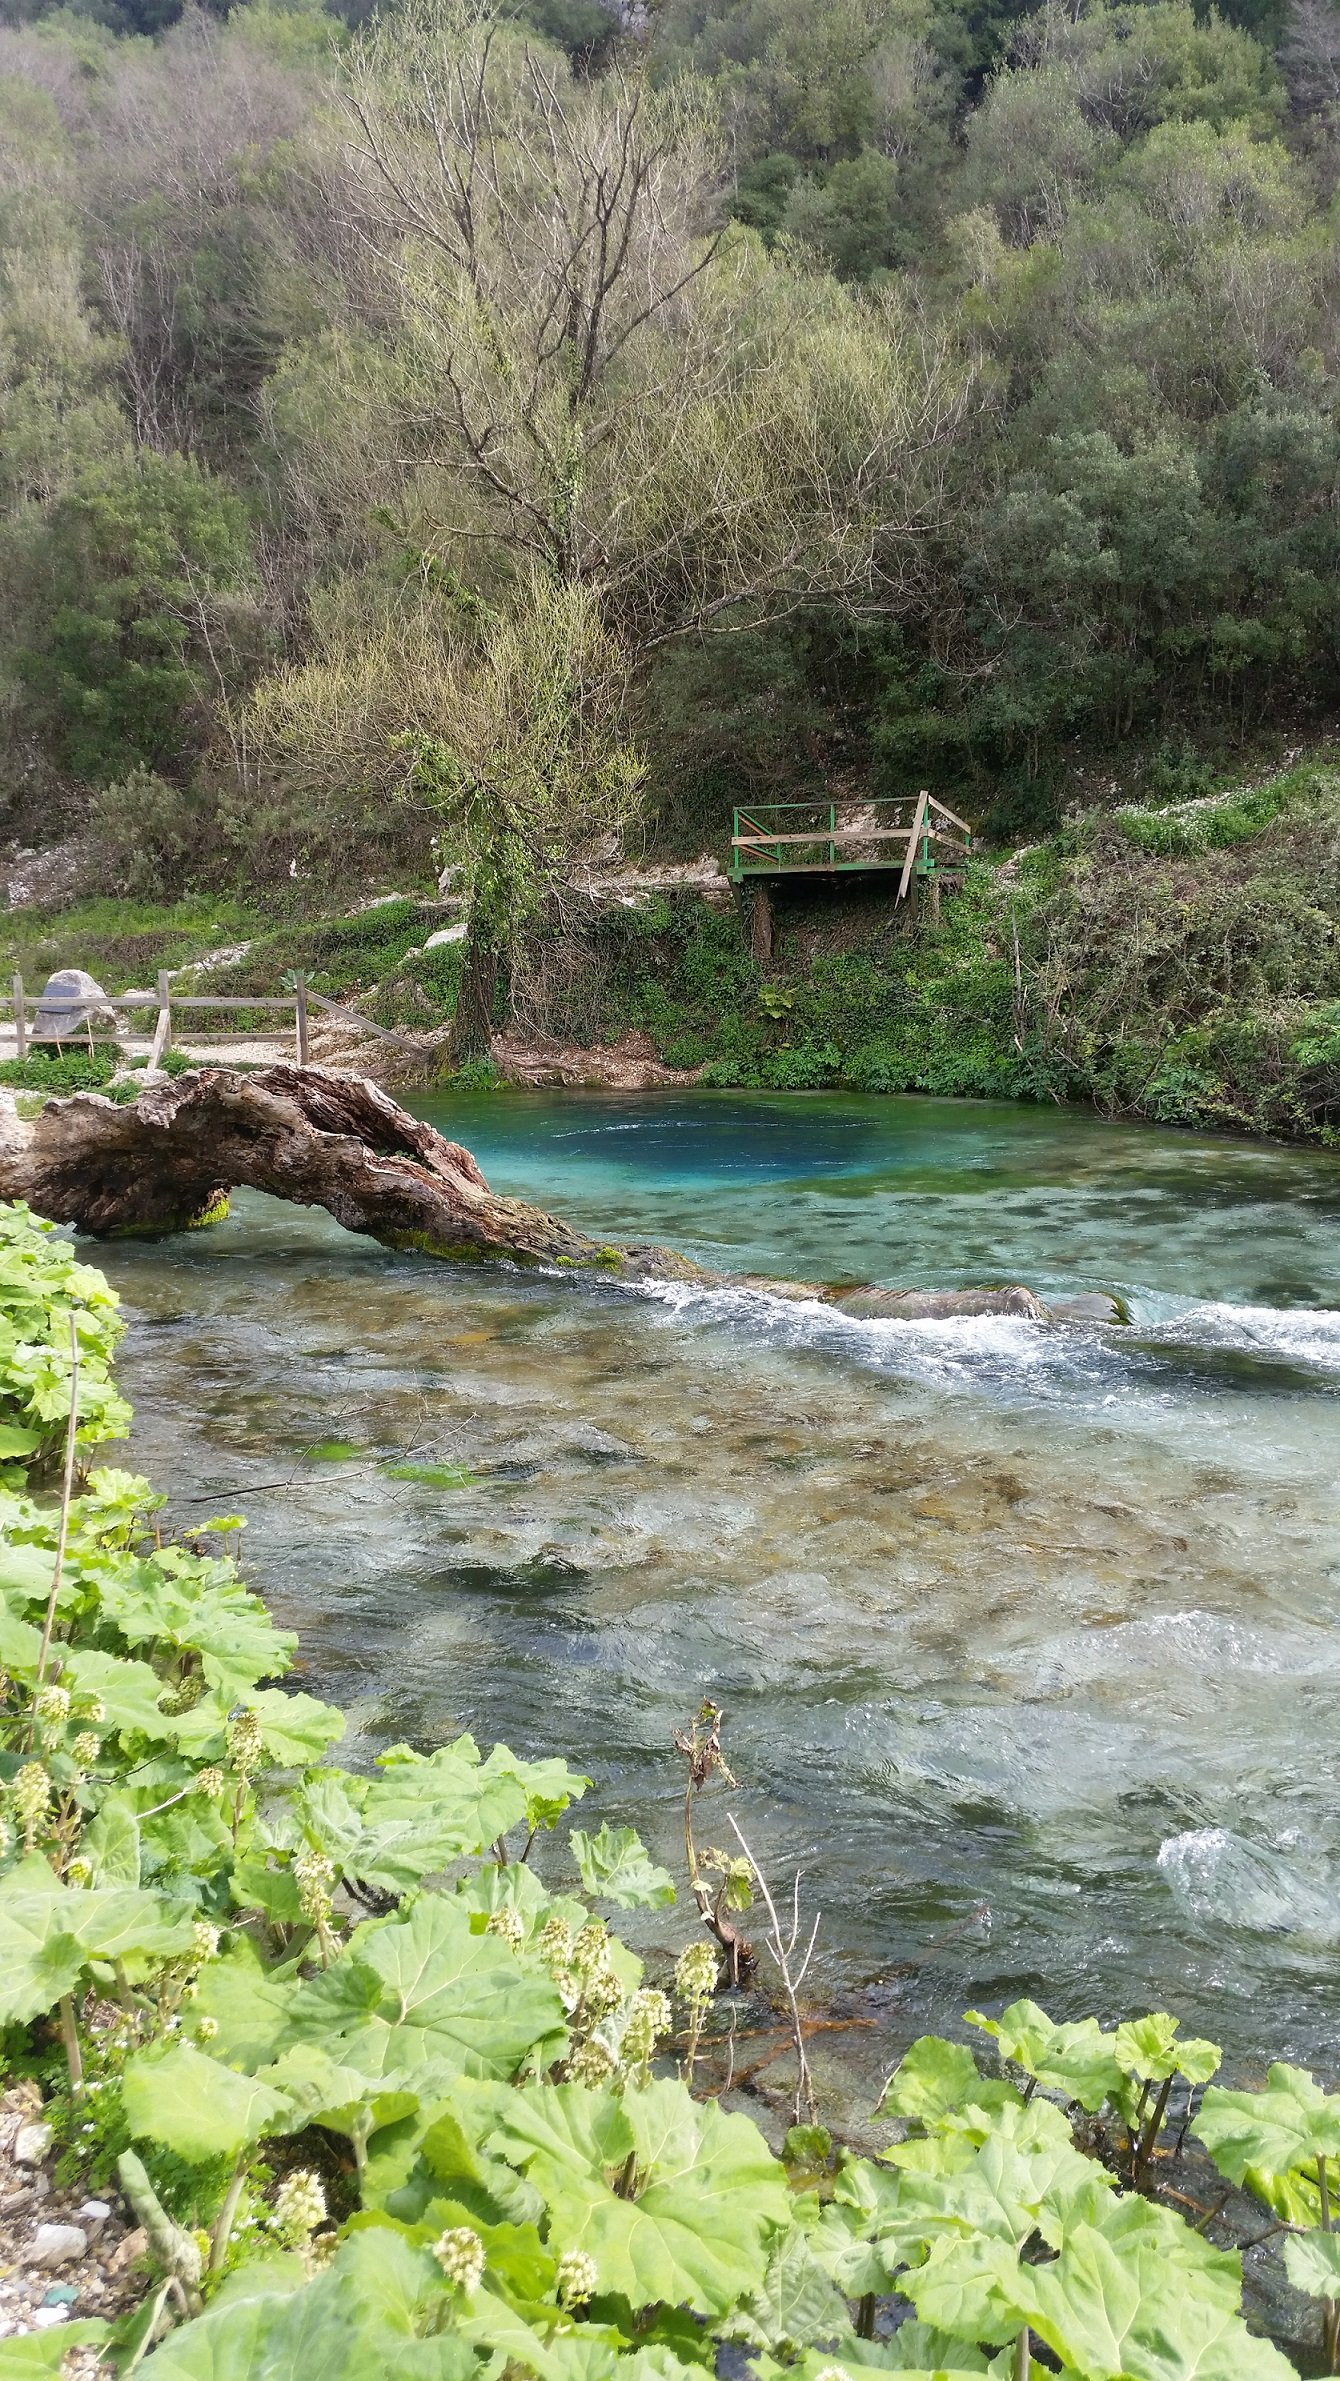 The Blue Eye of Muzine, a freshwater spring of vibrant blue water in Albania